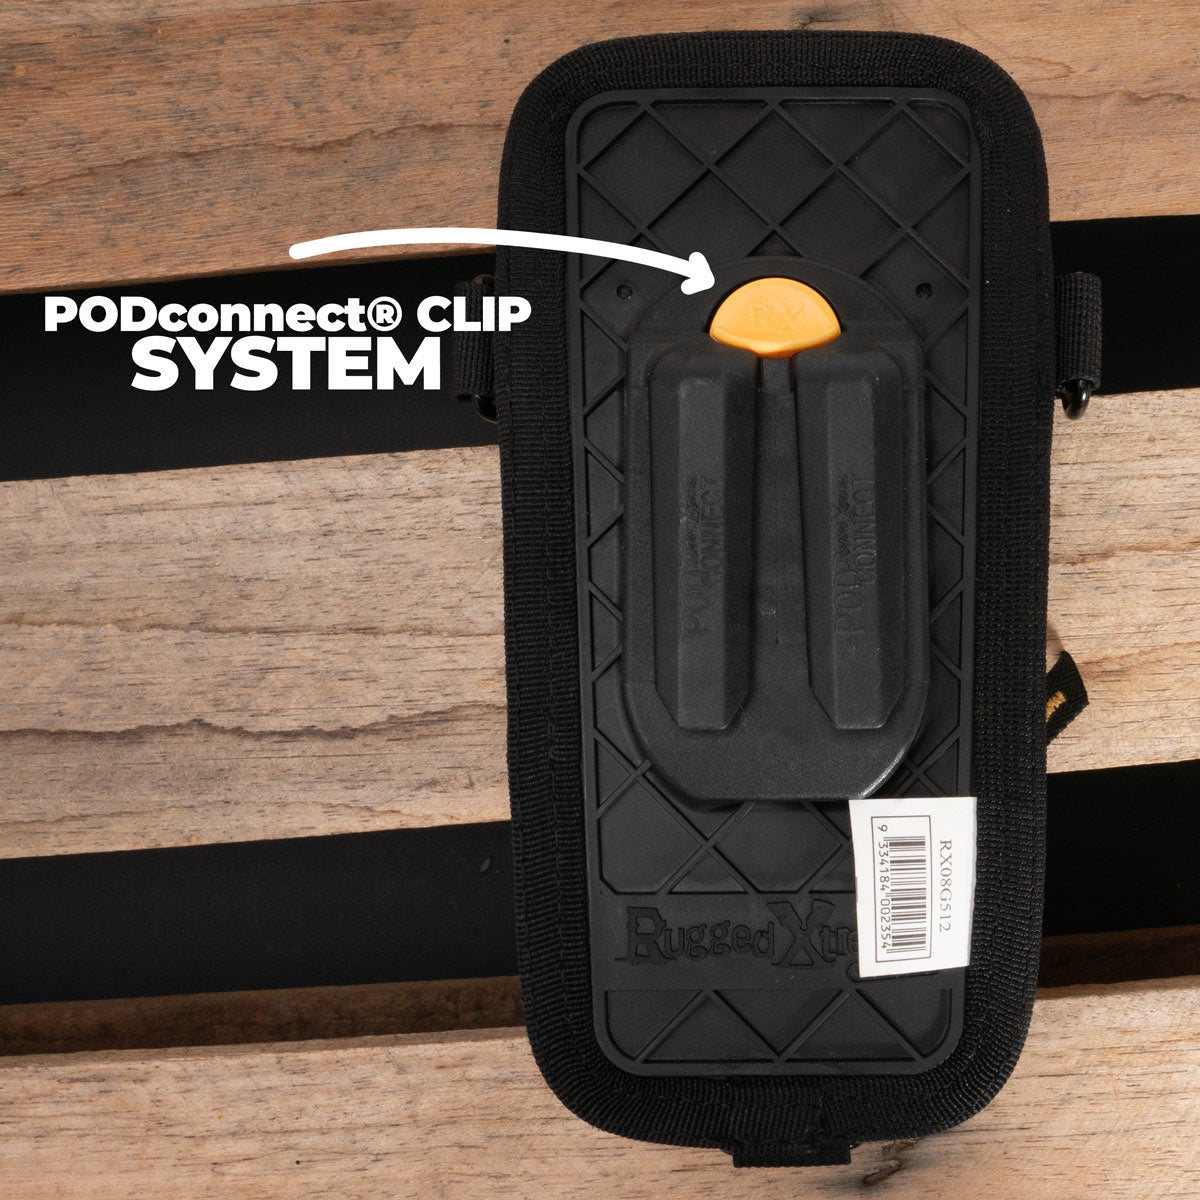 PODconnect Glasses Pod - Rugged Xtremes